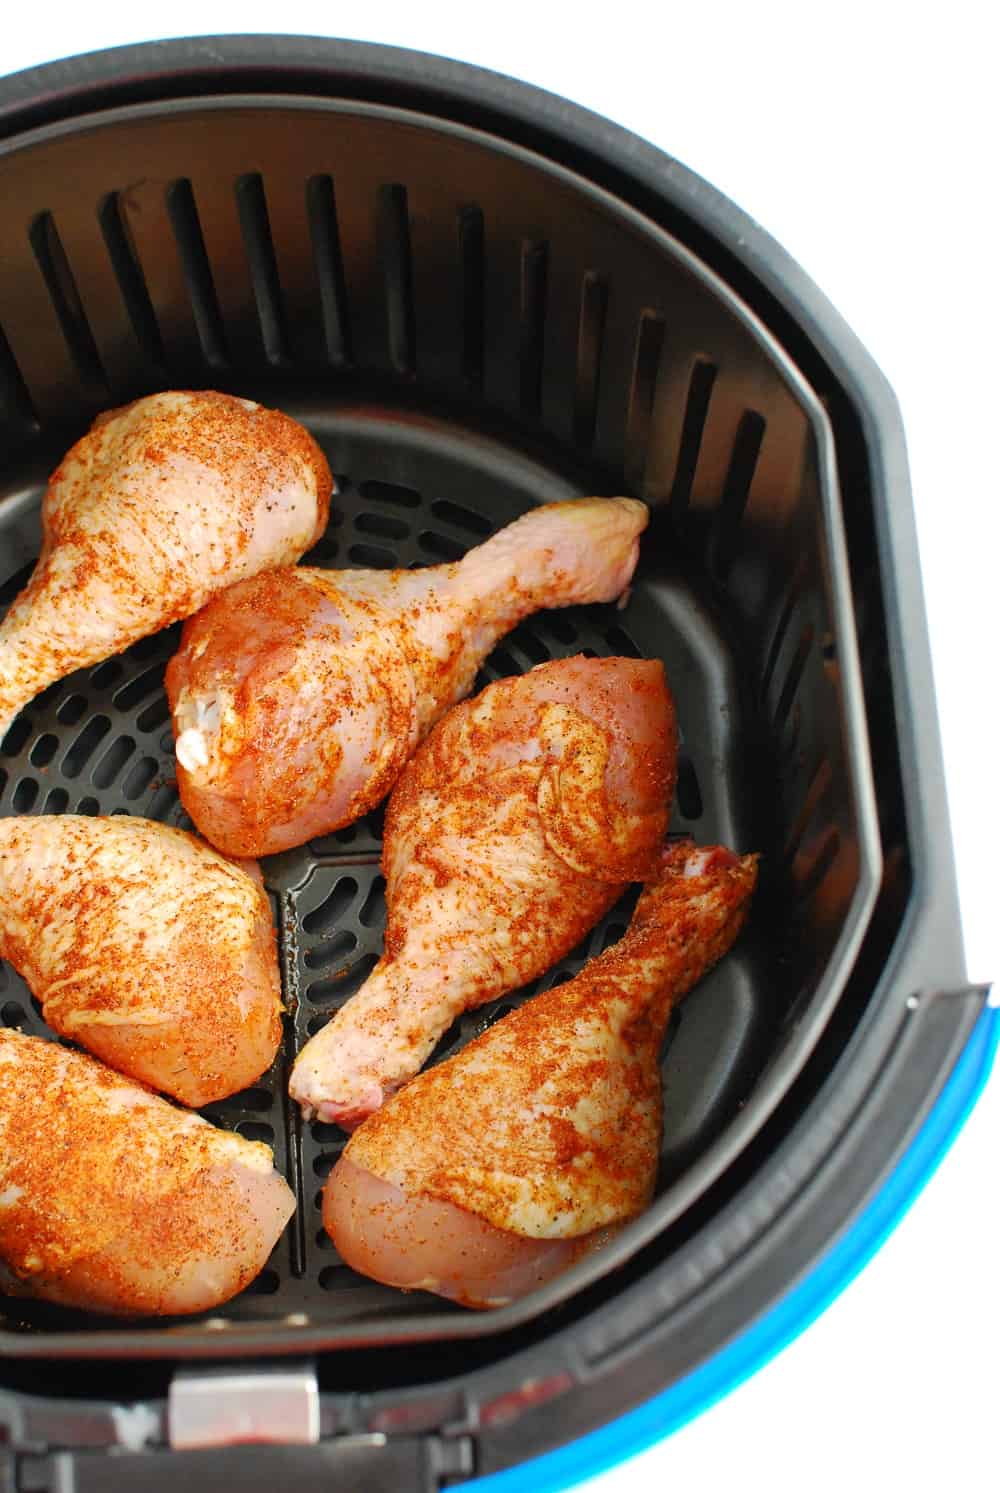 Uncooked chicken drumsticks in the basket of the air fryer.